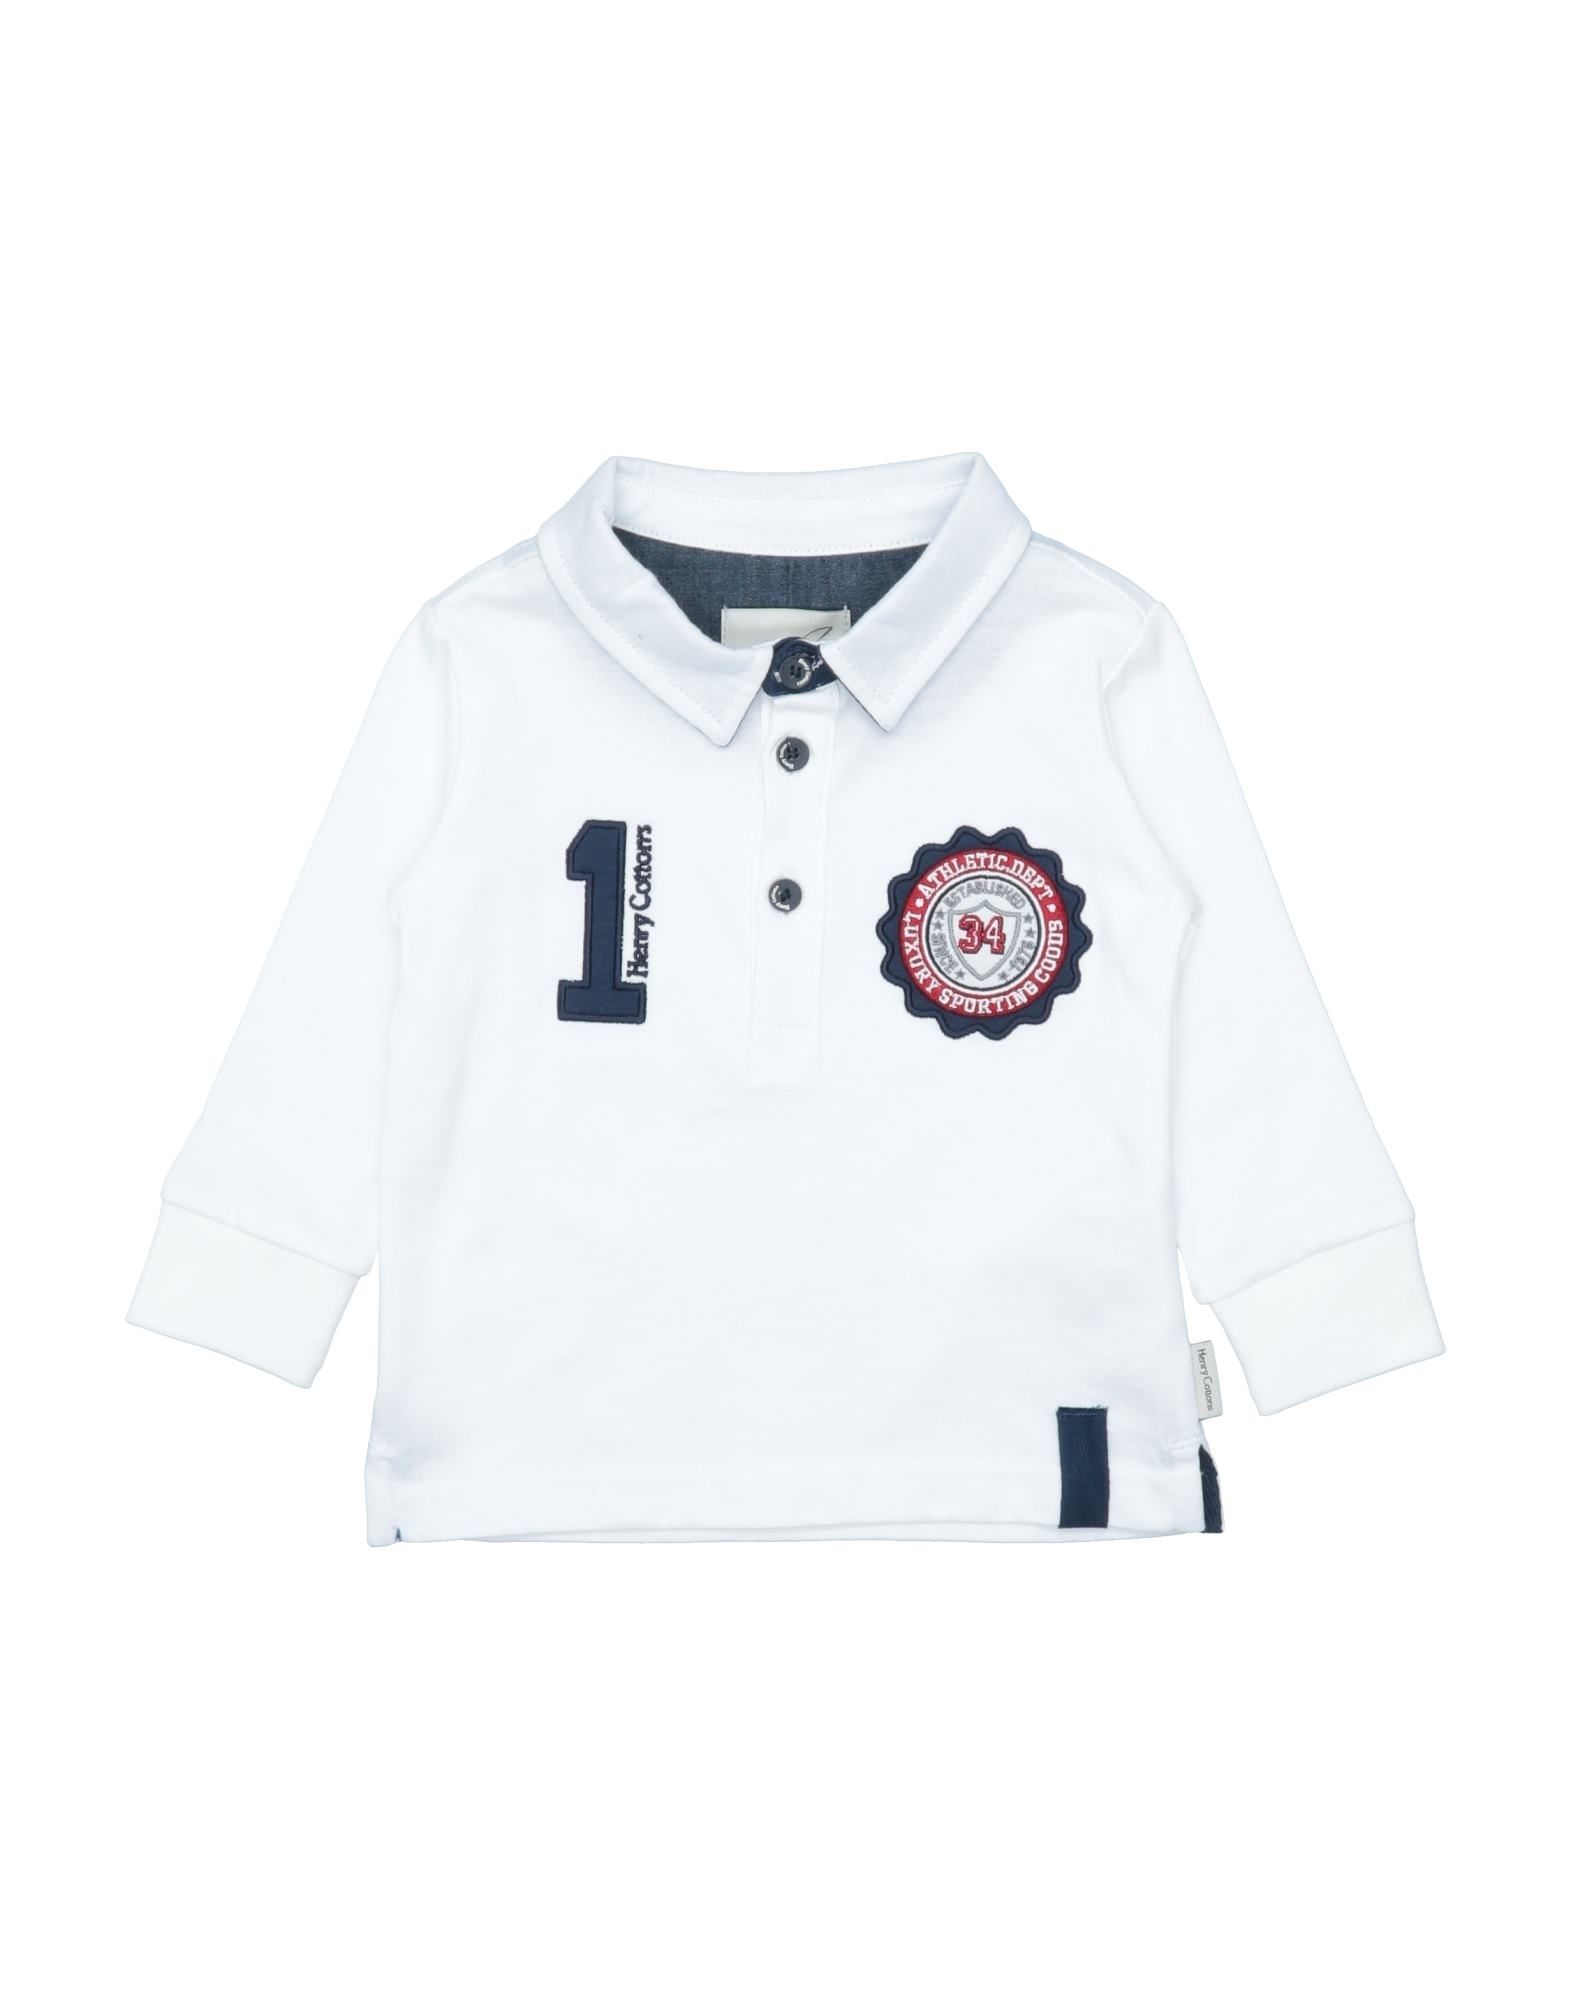 Henry Cotton's Kids' Polo Shirts In White